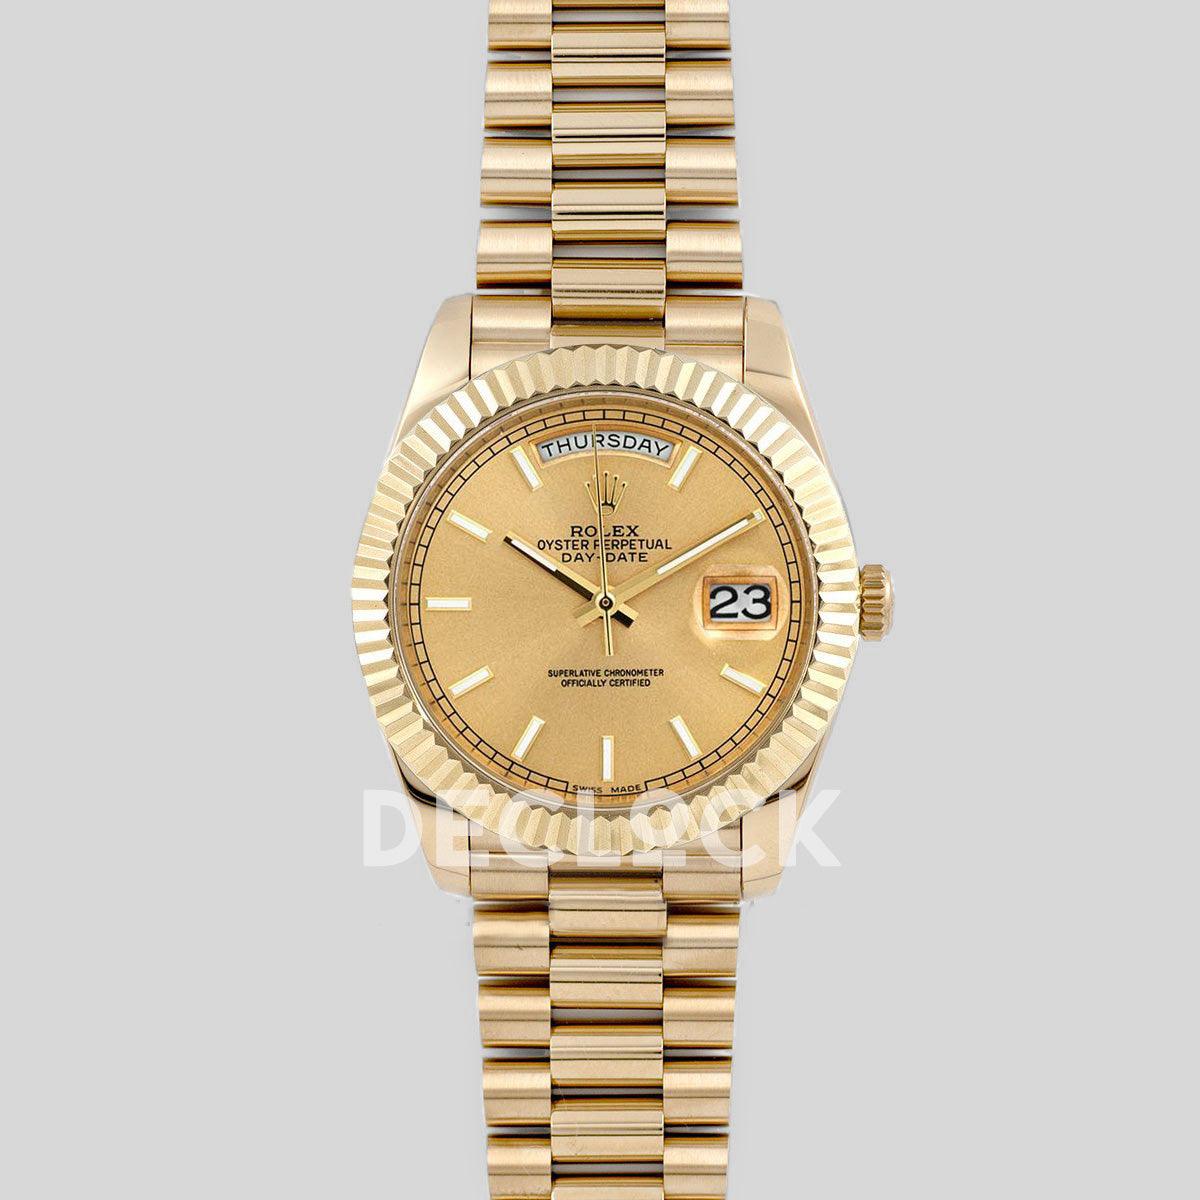 Replica Rolex Day-Date 40 228238 Champagne Dial in Yellow Gold - Replica Watches